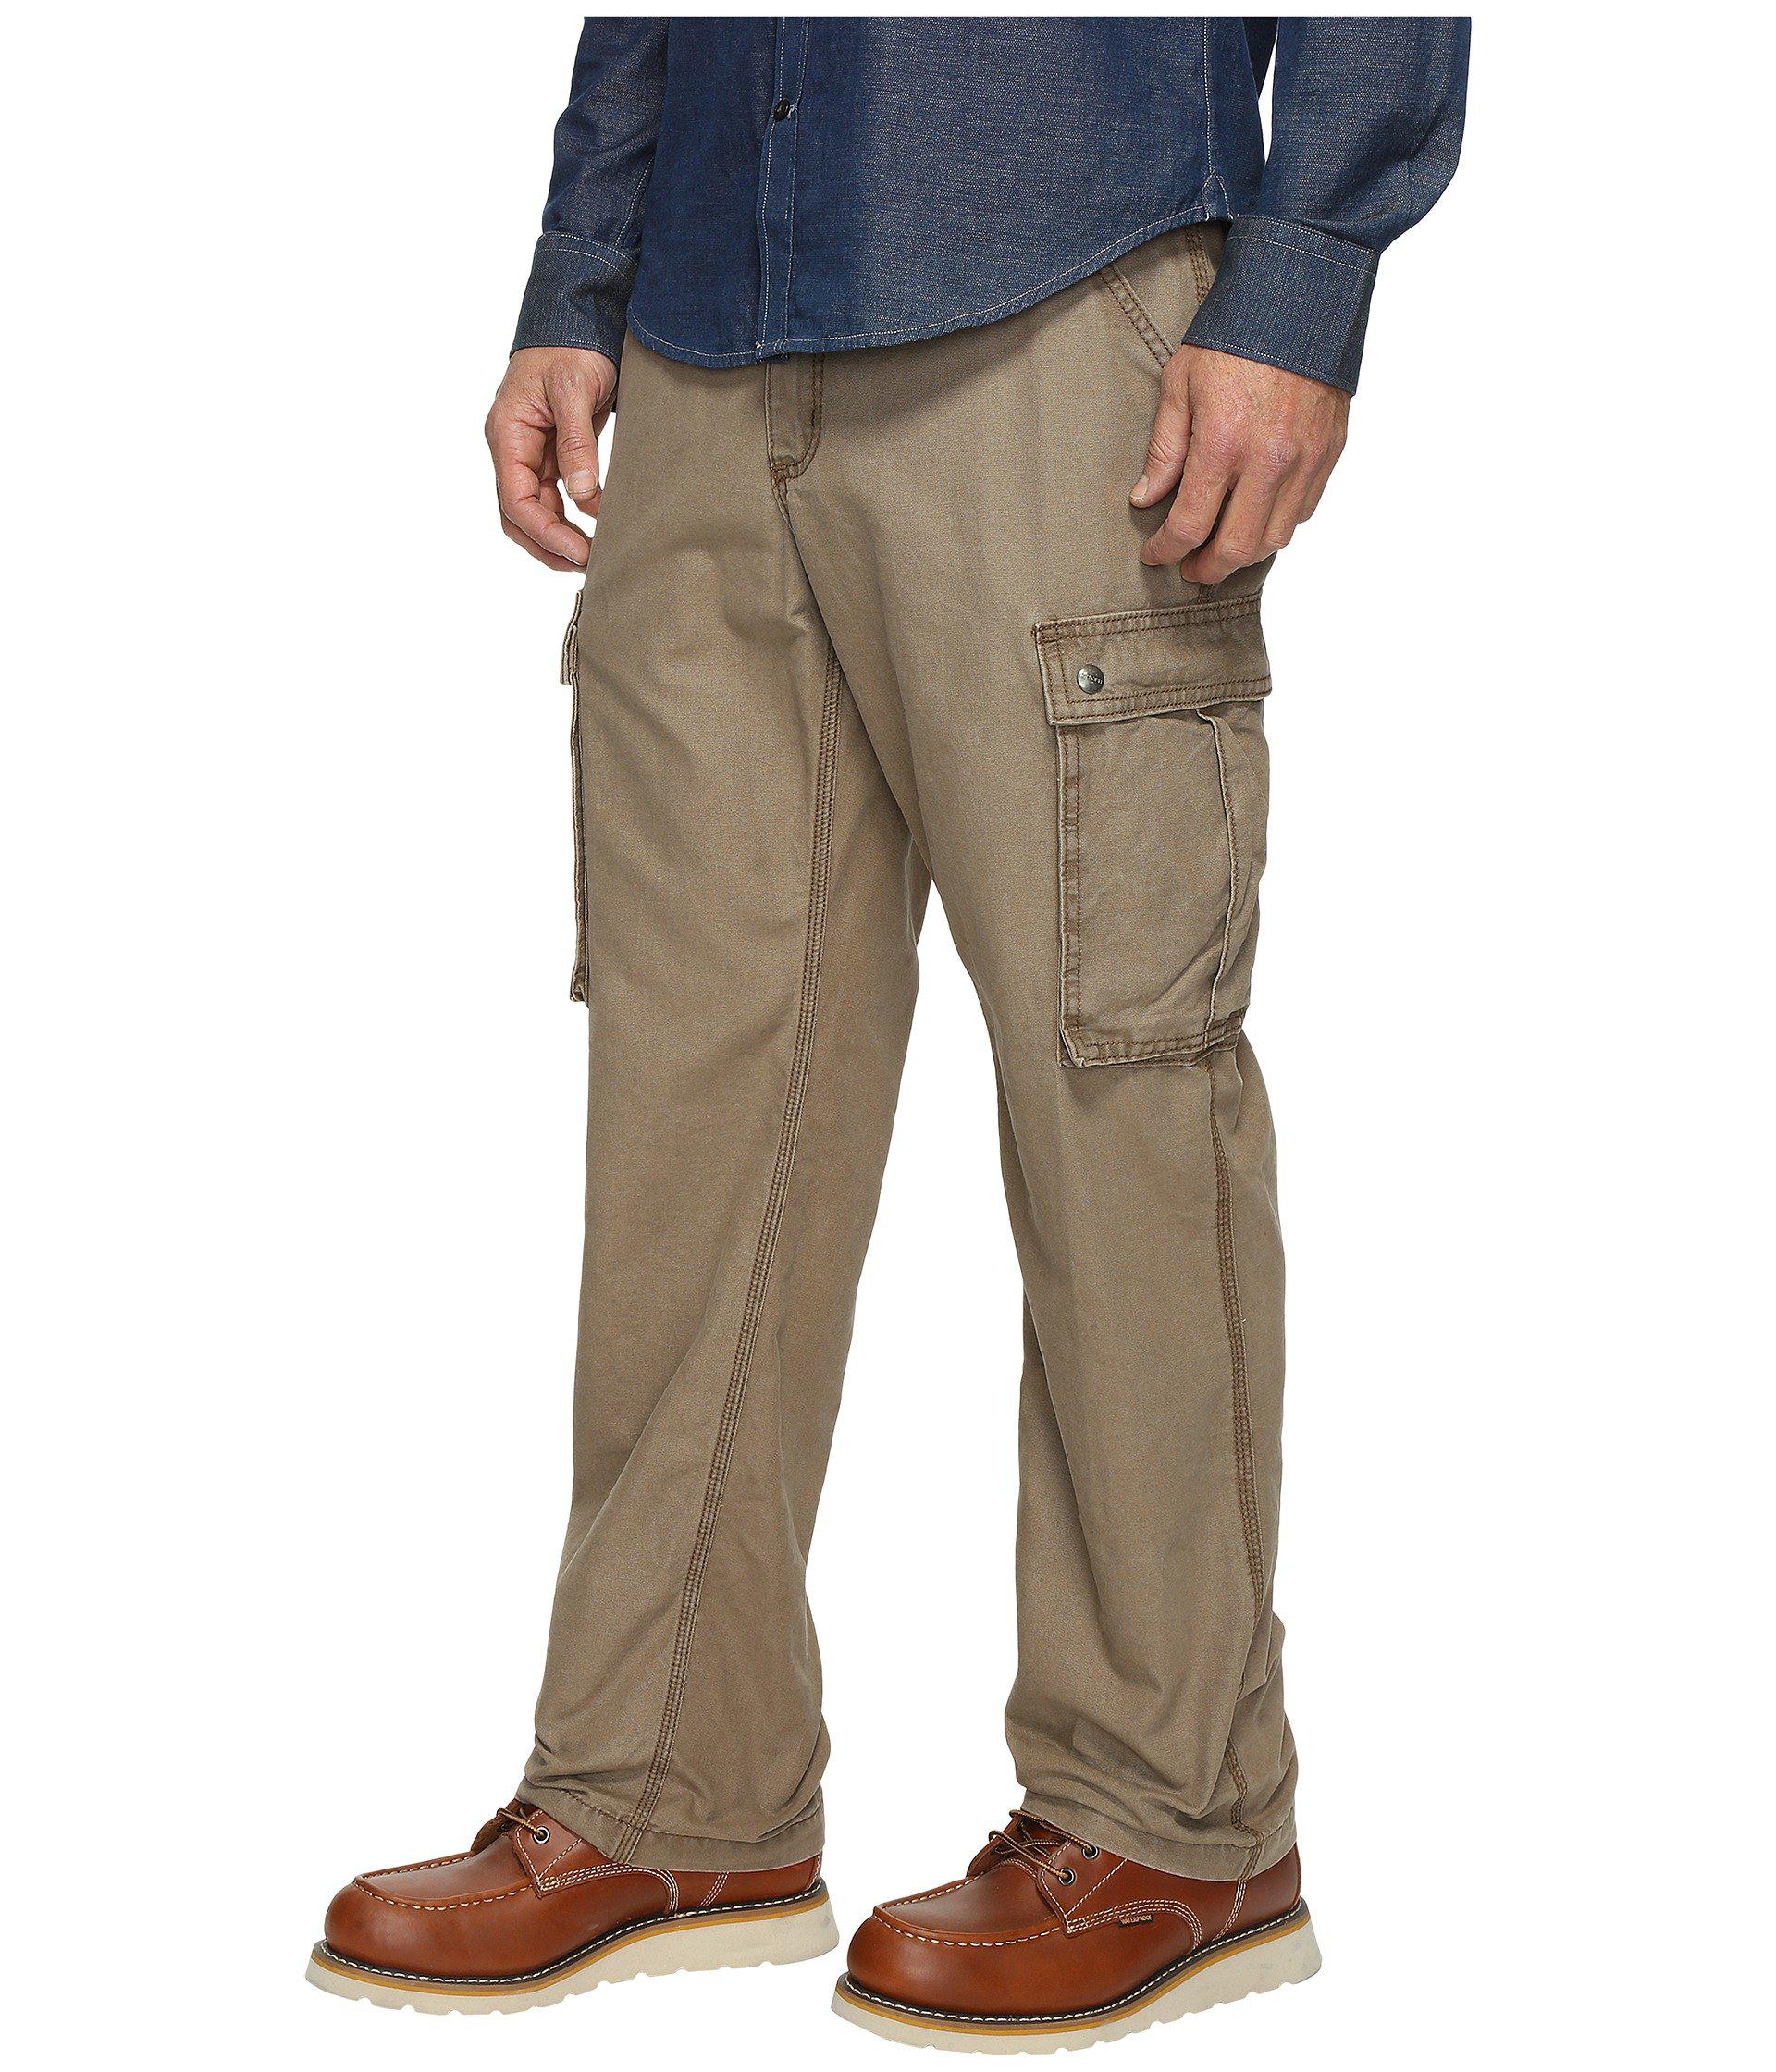 Carhartt Cotton Rugged Cargo Pant in Brown for Men - Lyst